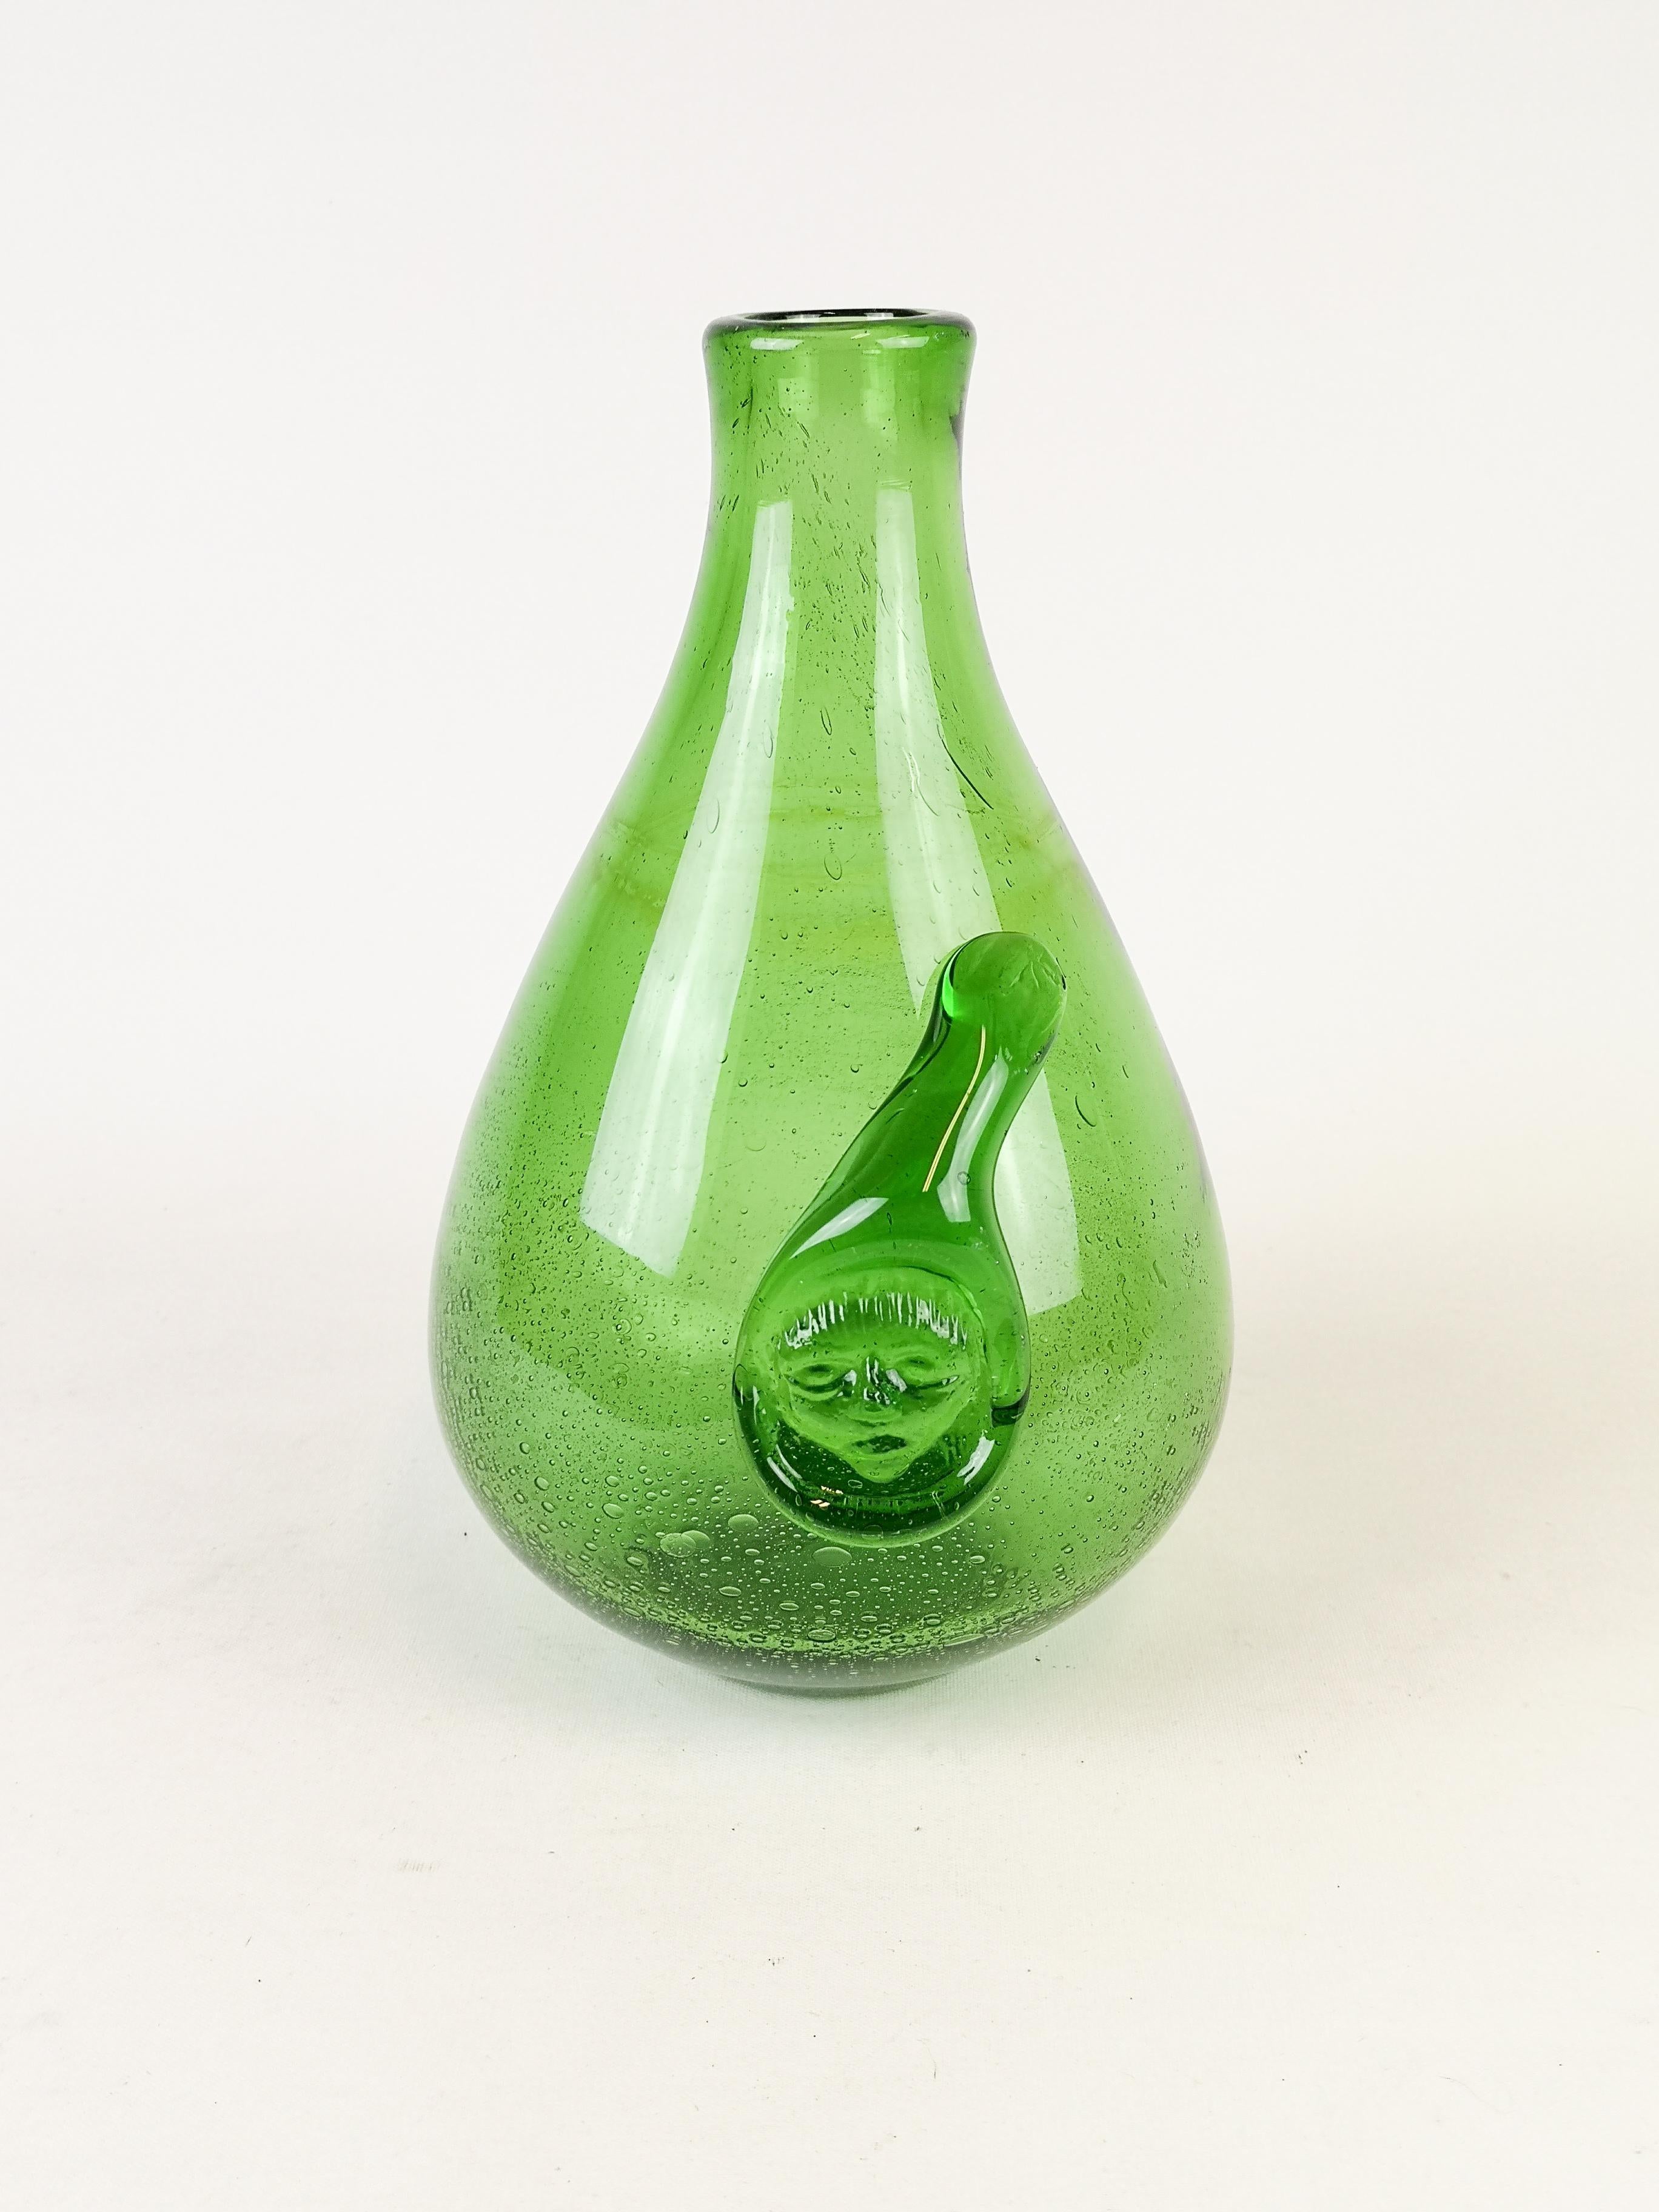 Wonderful vase in beautiful green colore with the typical sigil of Höglund in the middle of the vase. The vase is made at Boda, Sweden in the 1950s. 

Good condition.

Measures: H 27 cm D 15 cm.
 